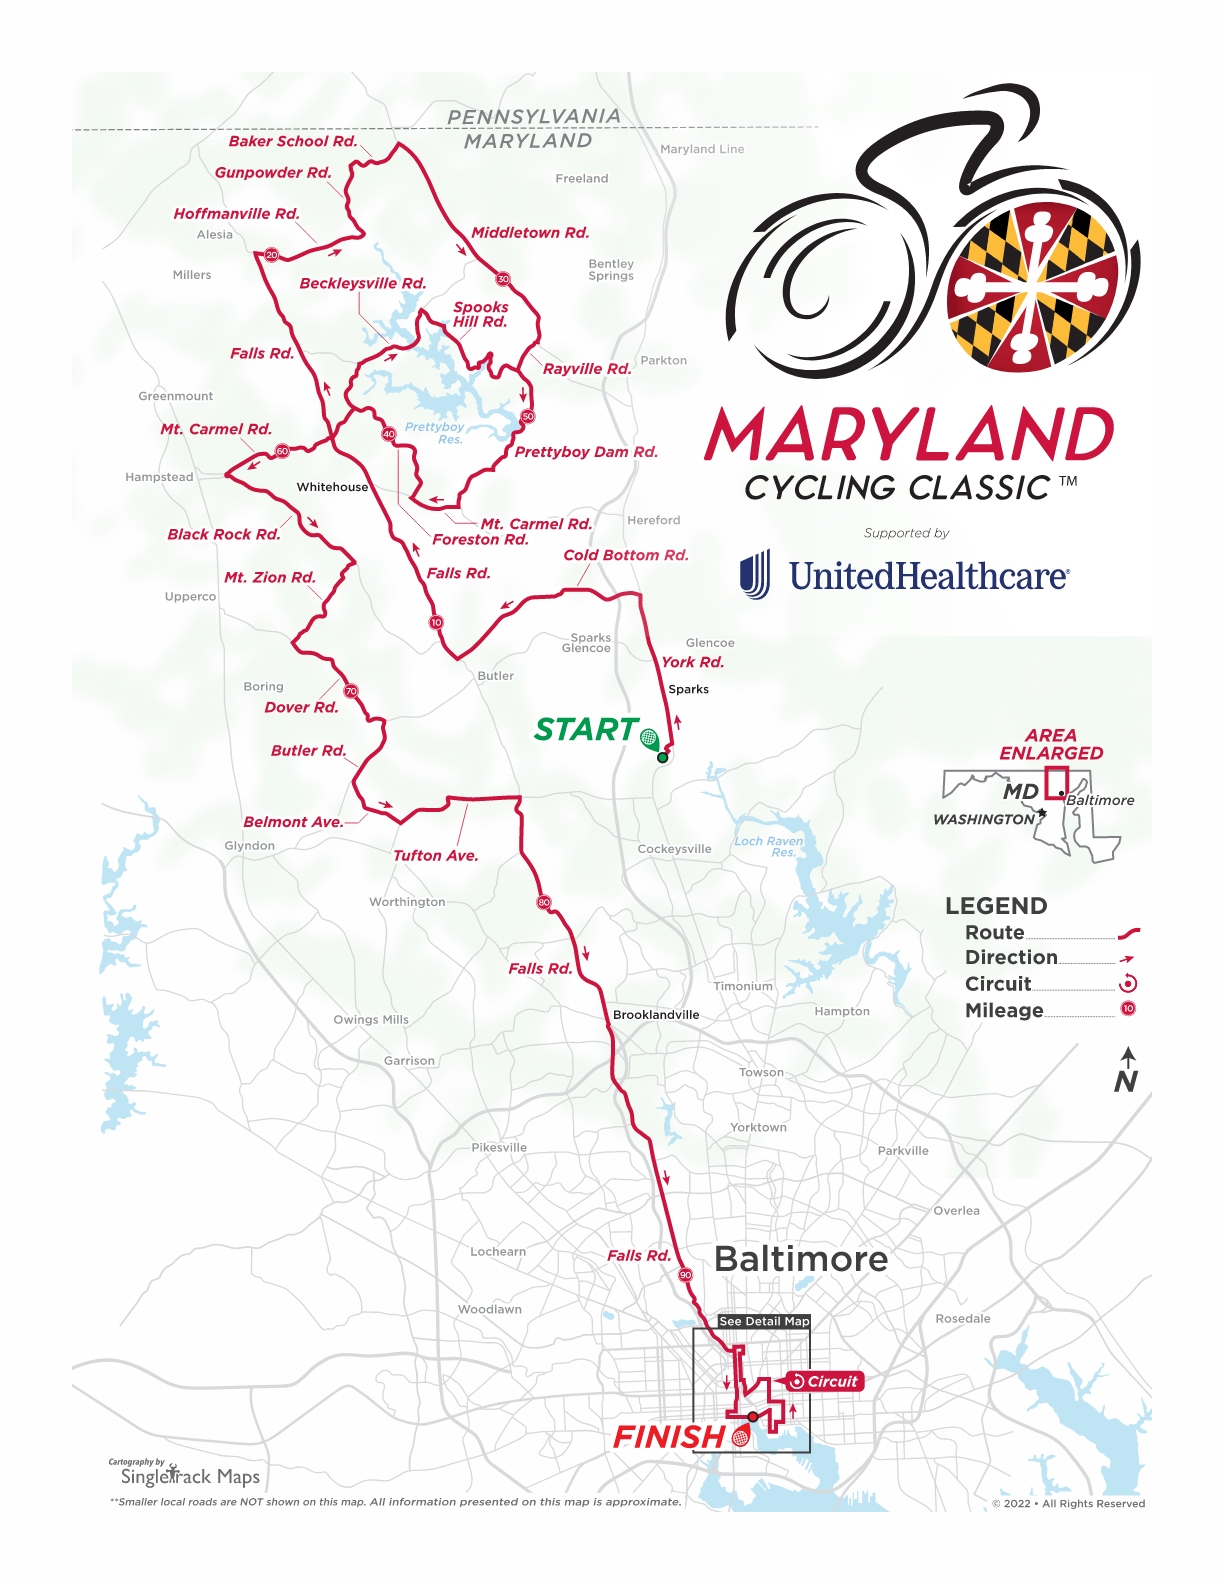 Route Maryland Cycling Classic